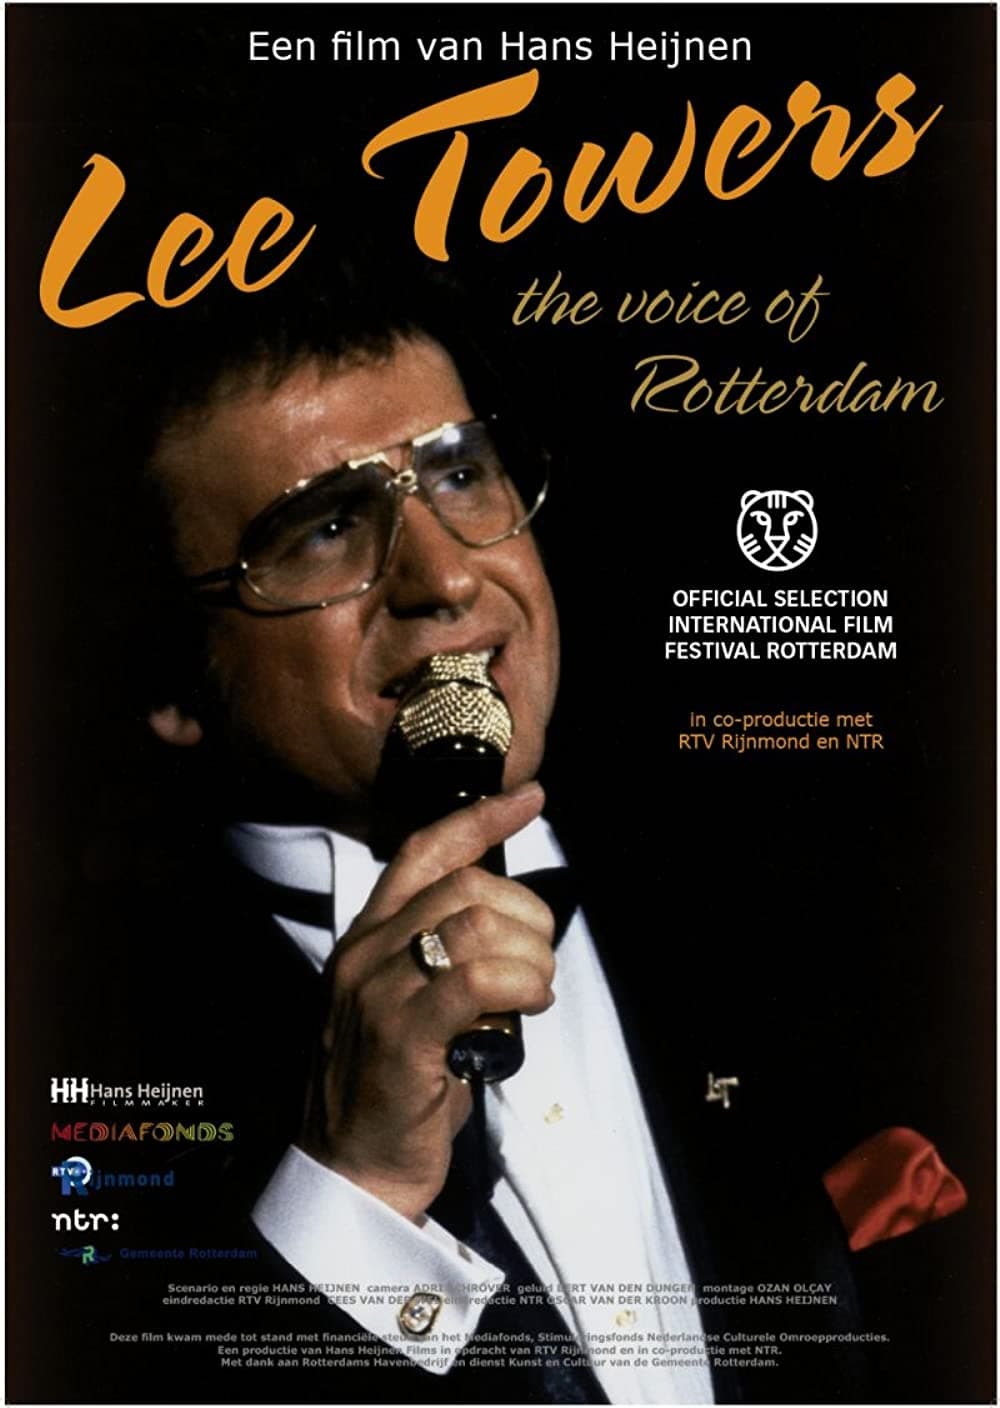 Lee Towers, The Voice of Rotterdam